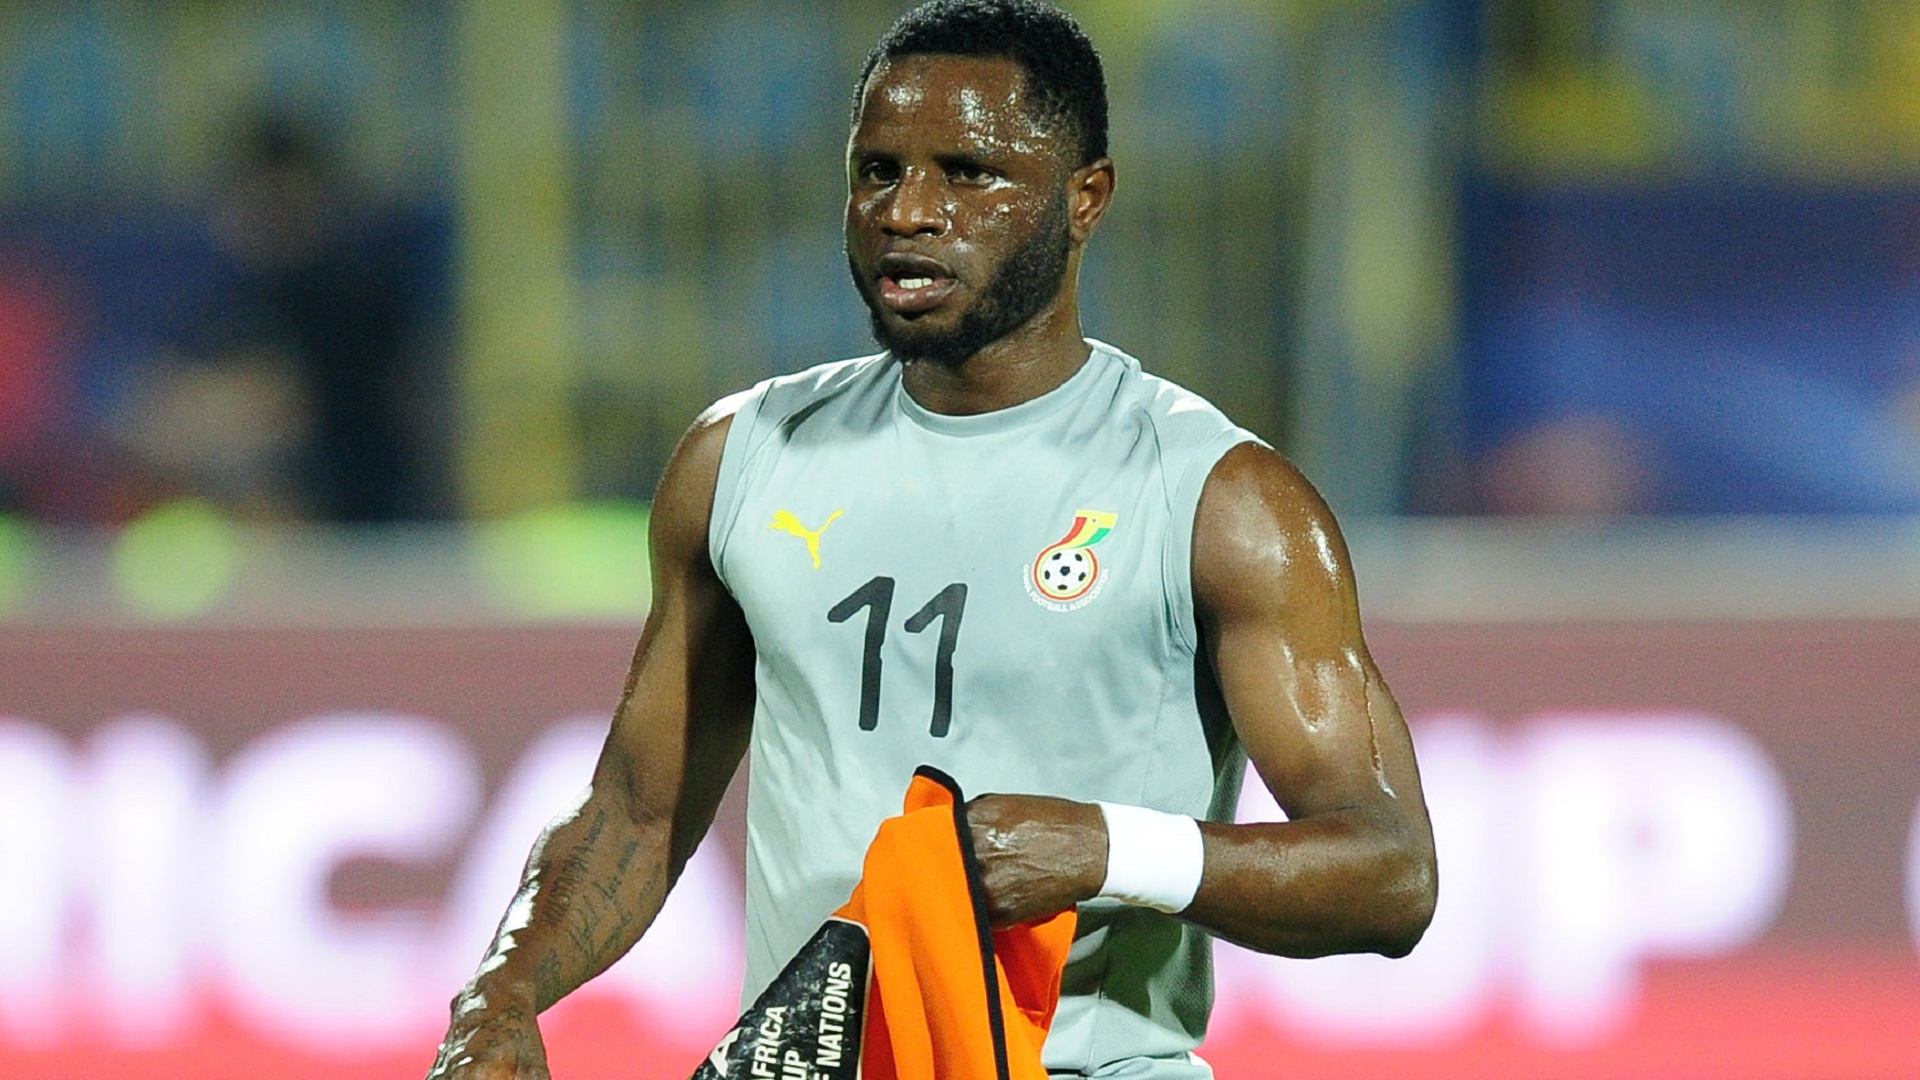 Afcon 2021 qualifiers: Wakaso talks up Ghana readiness for South Africa and Sao Tome clashes | Goal.com